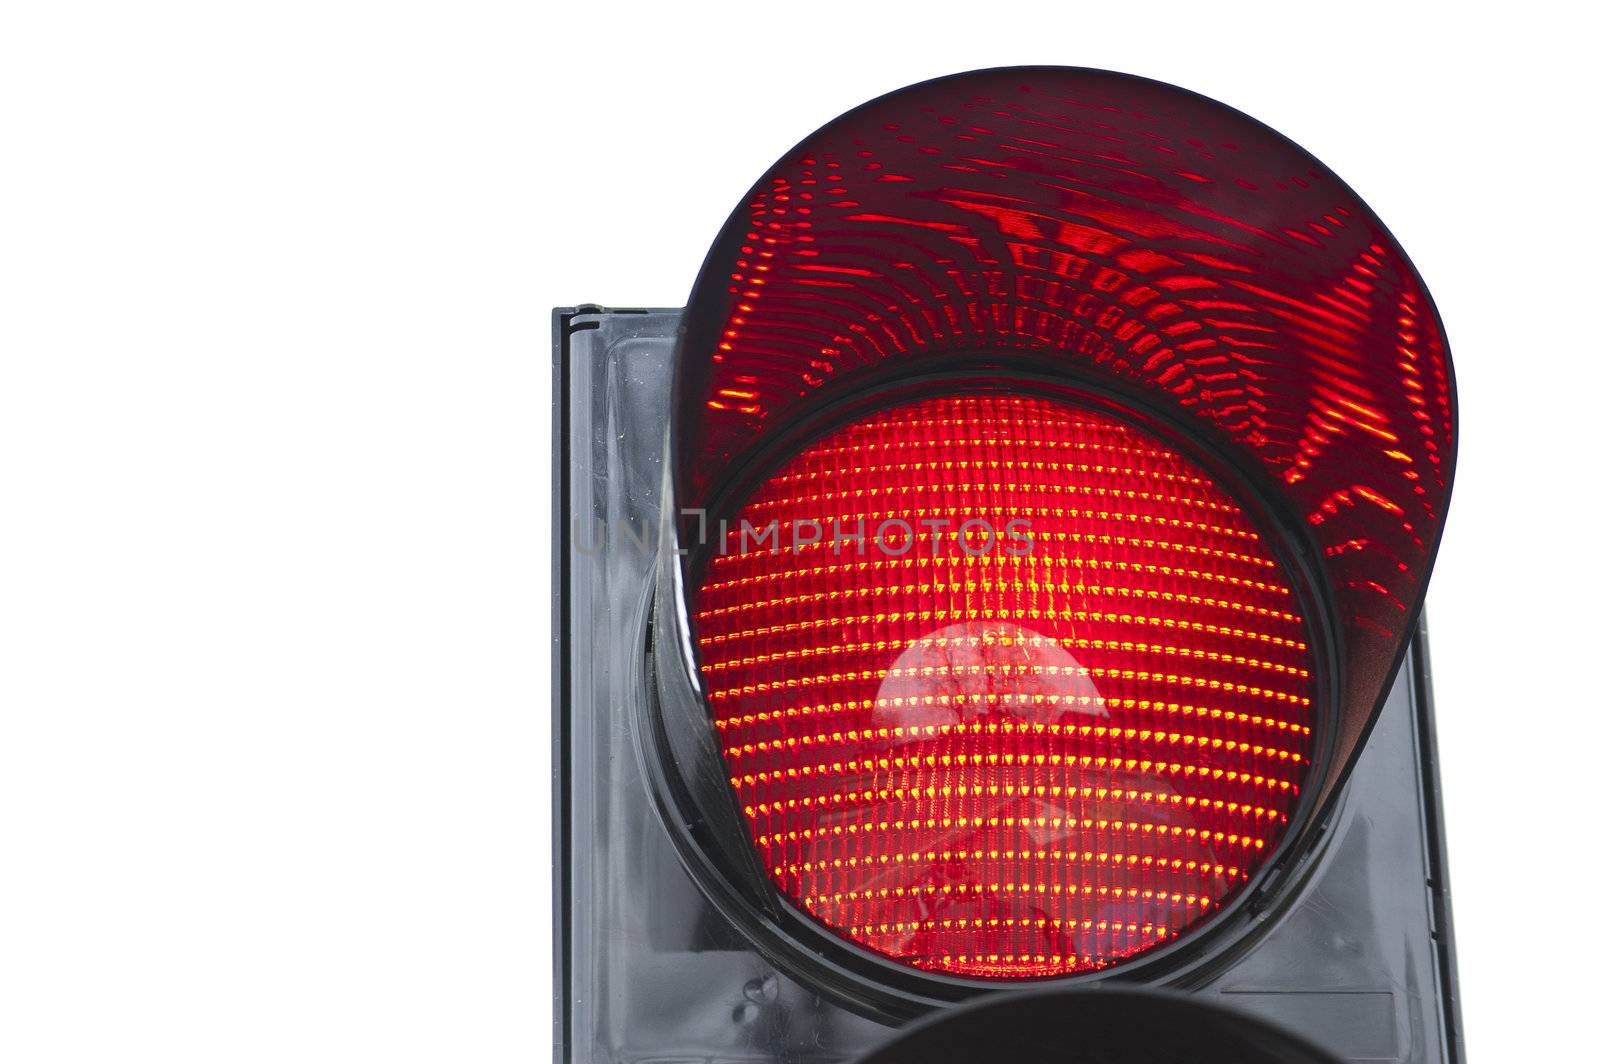 Traffic light signal shows red light by vetdoctor